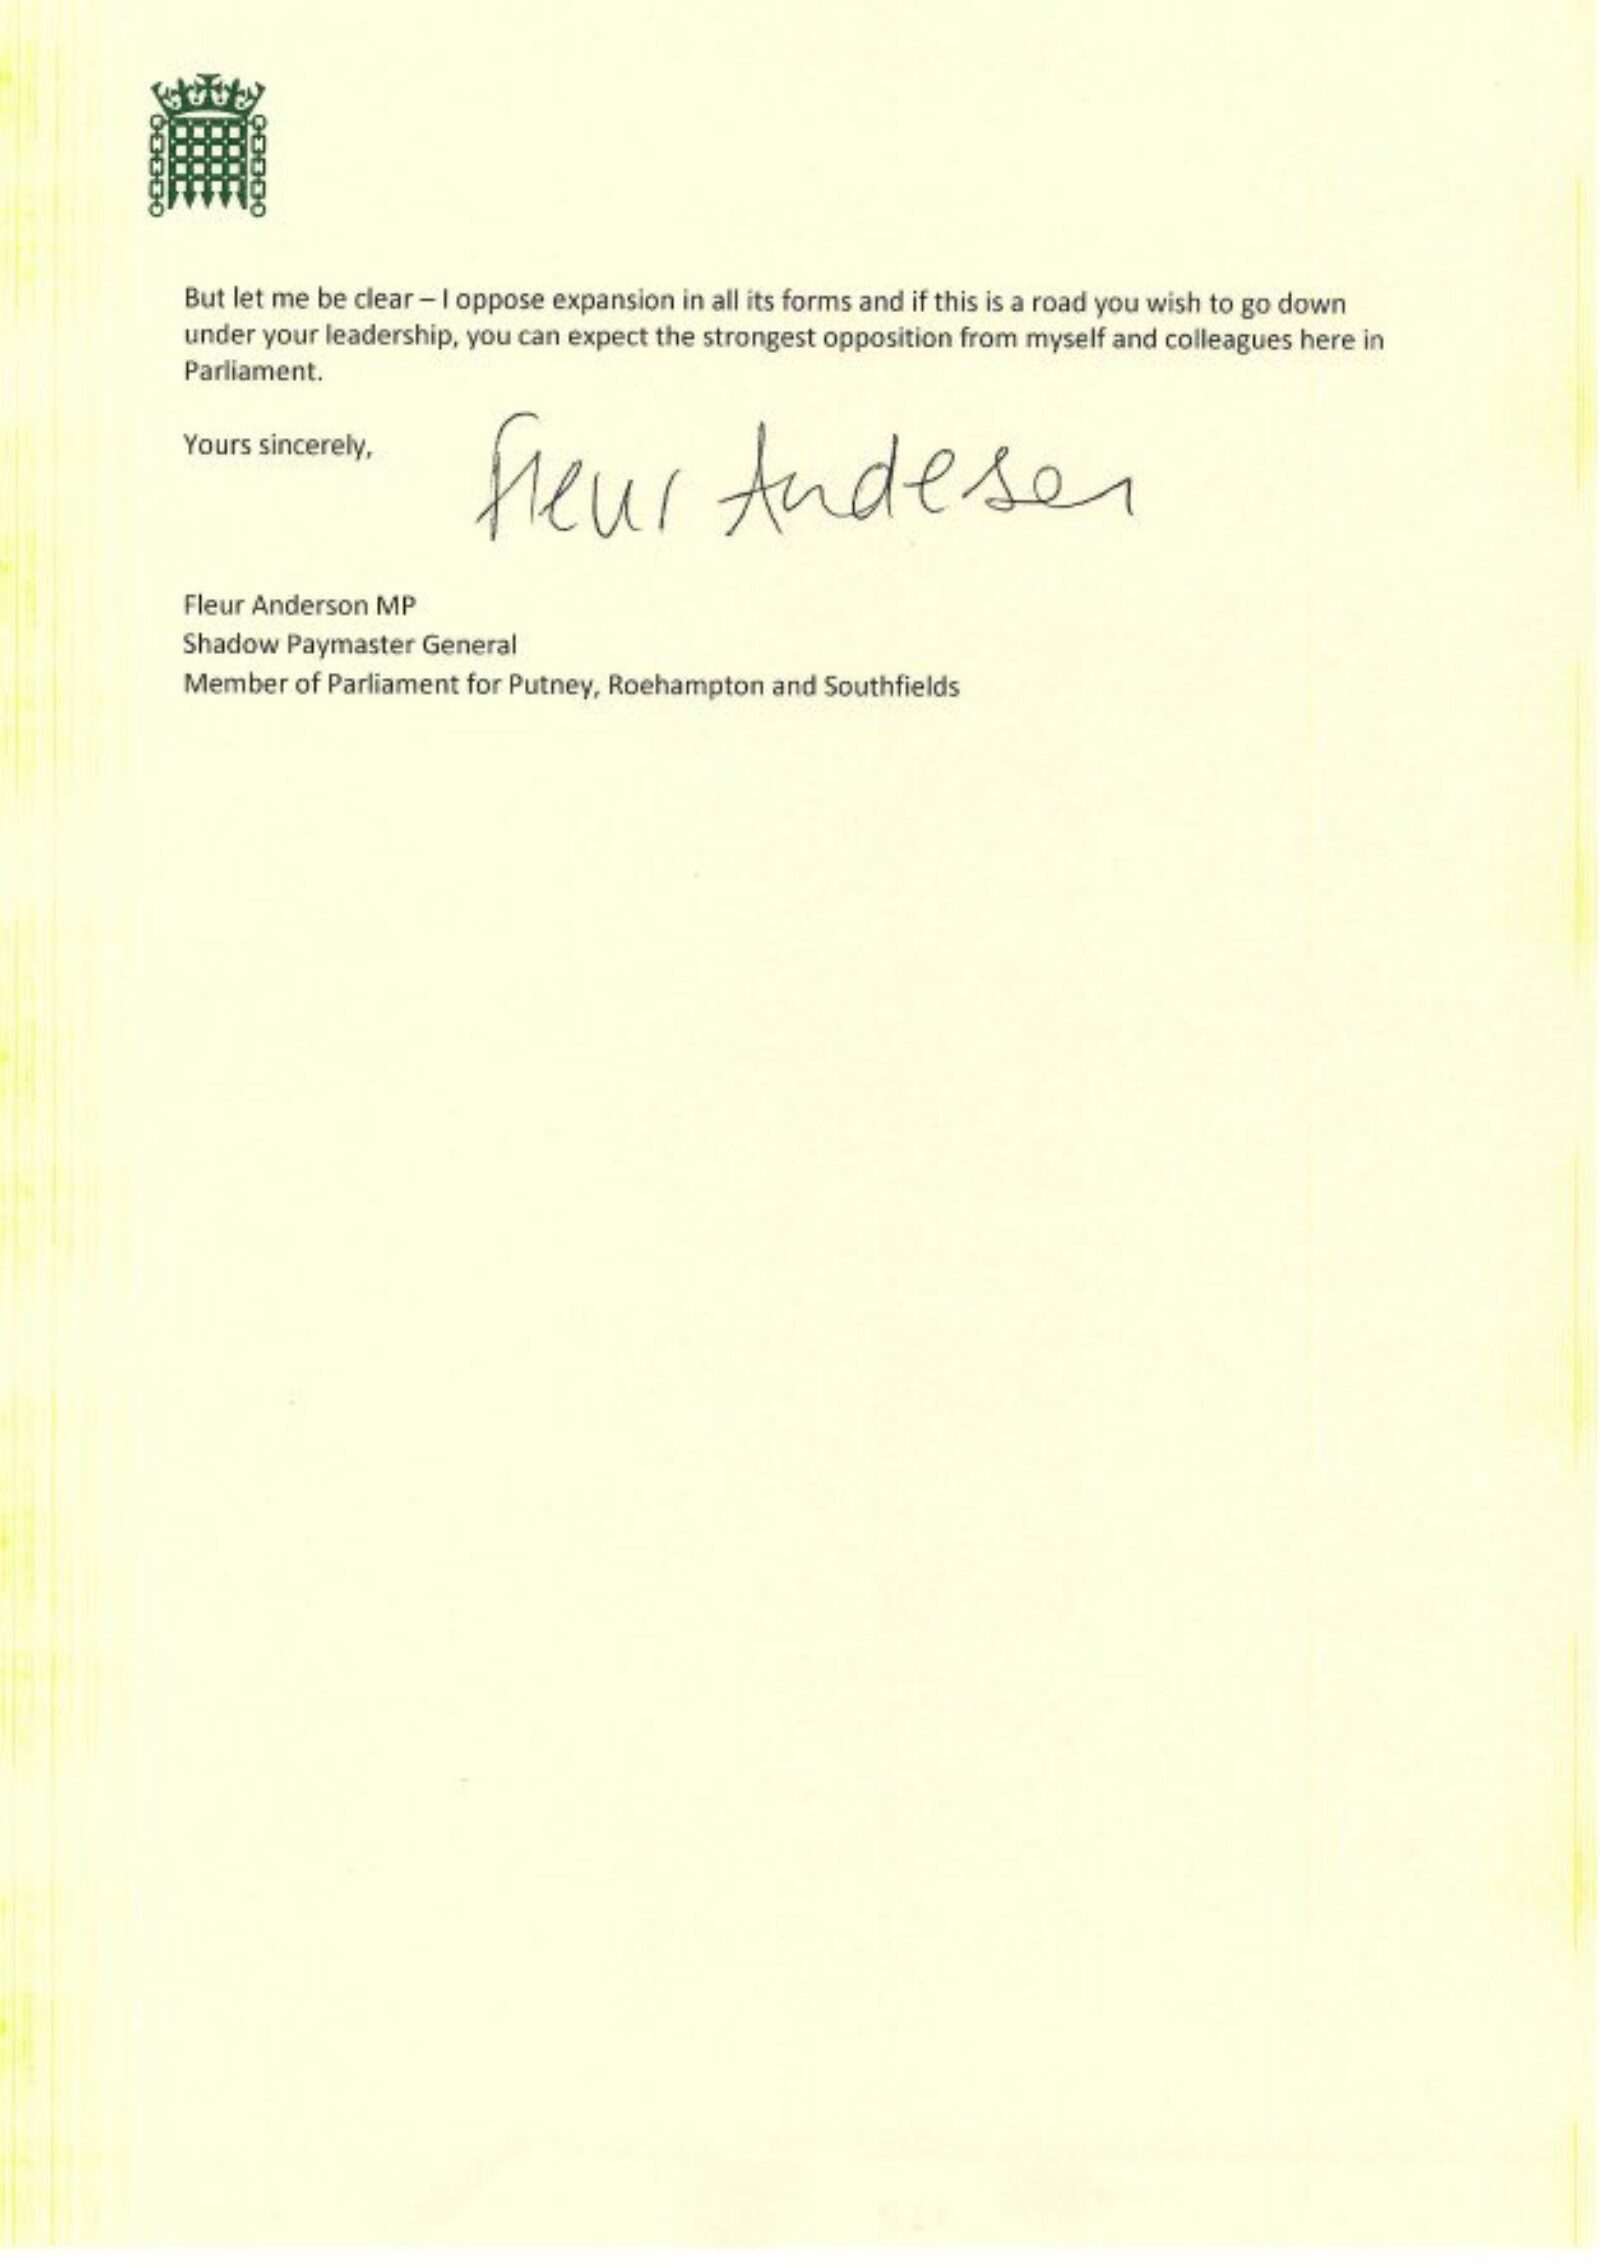 Letter from Fleur Anderson MP to the incoming CEO of Heathrow, against any expansion of the airport. 